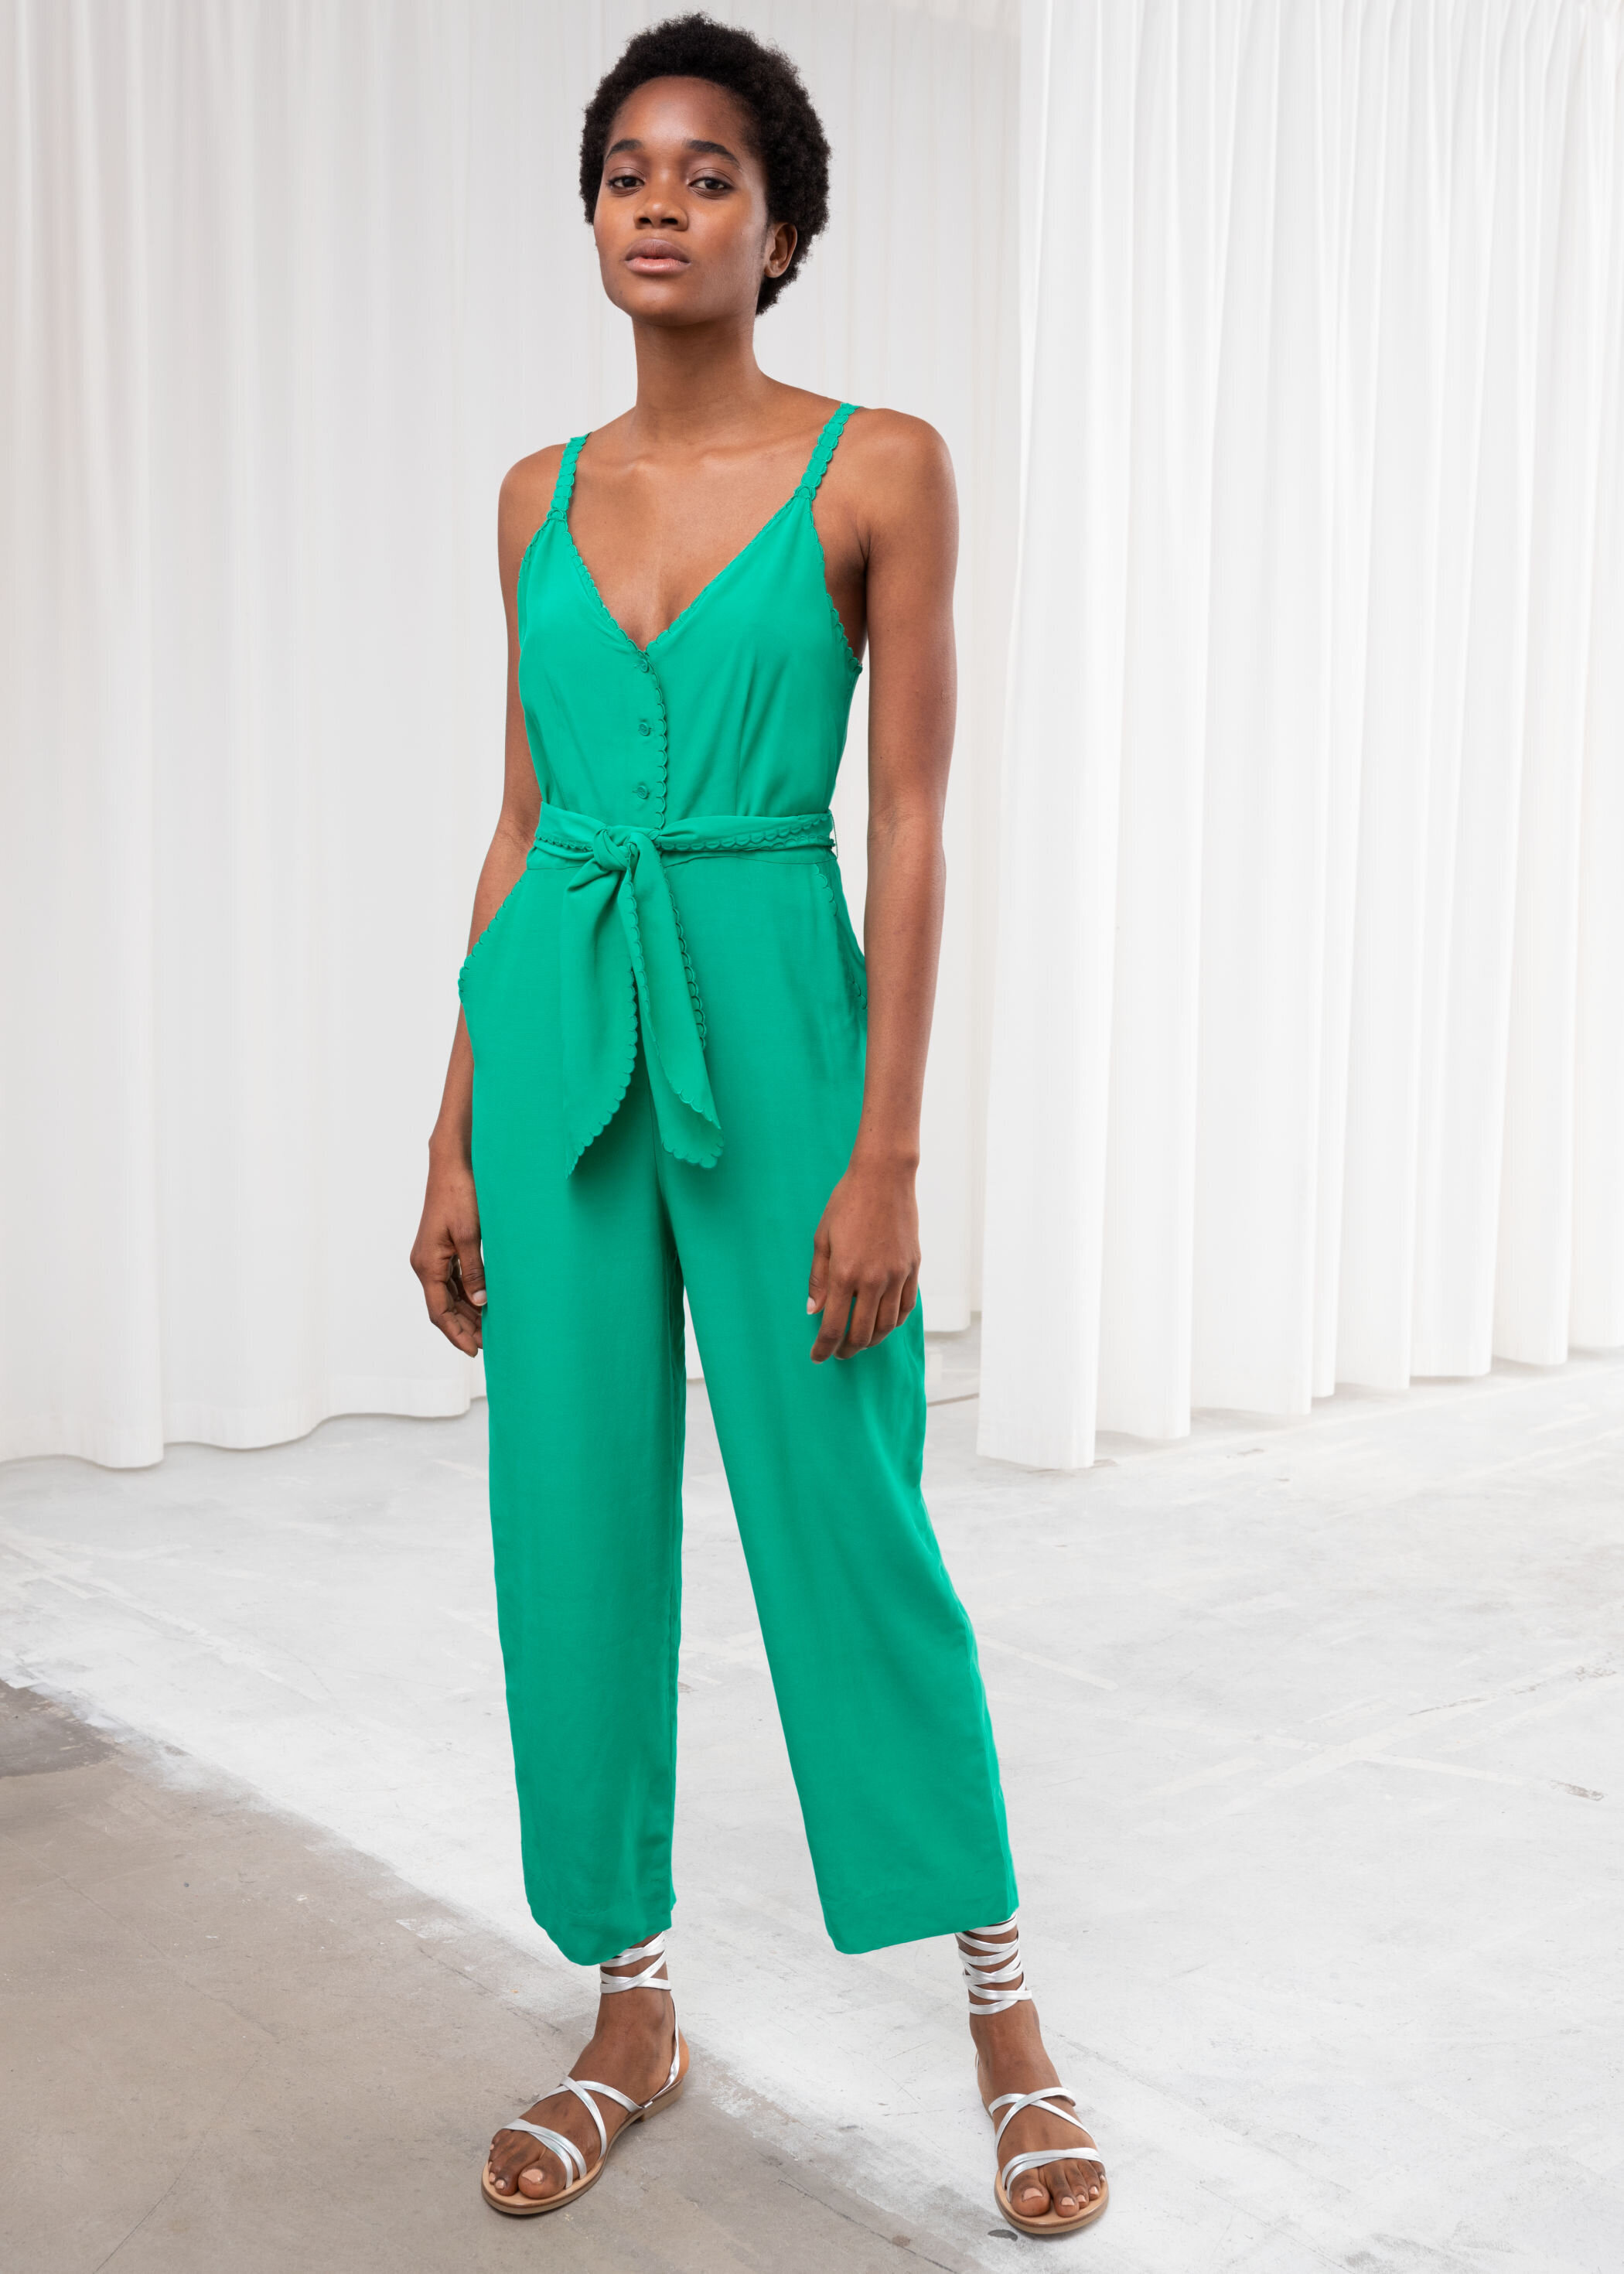 Best Spring and Summer Jumpsuits for Women